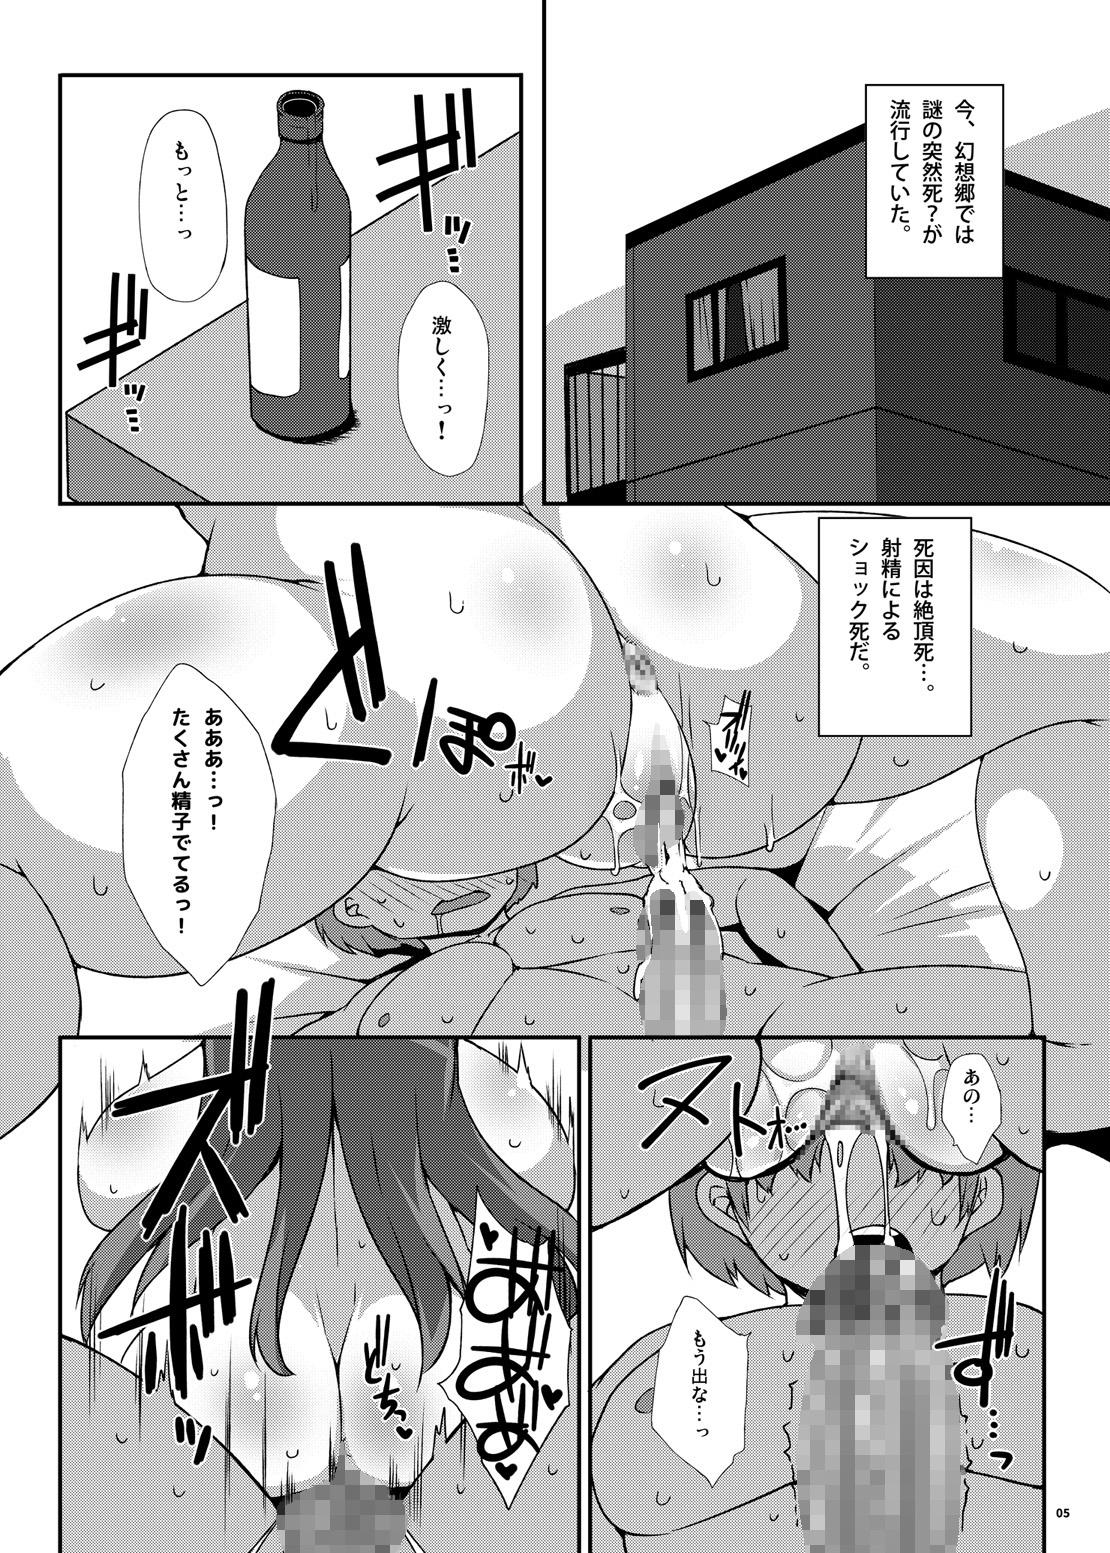 Calle Patche Houkai - Touhou project Pawg - Page 4